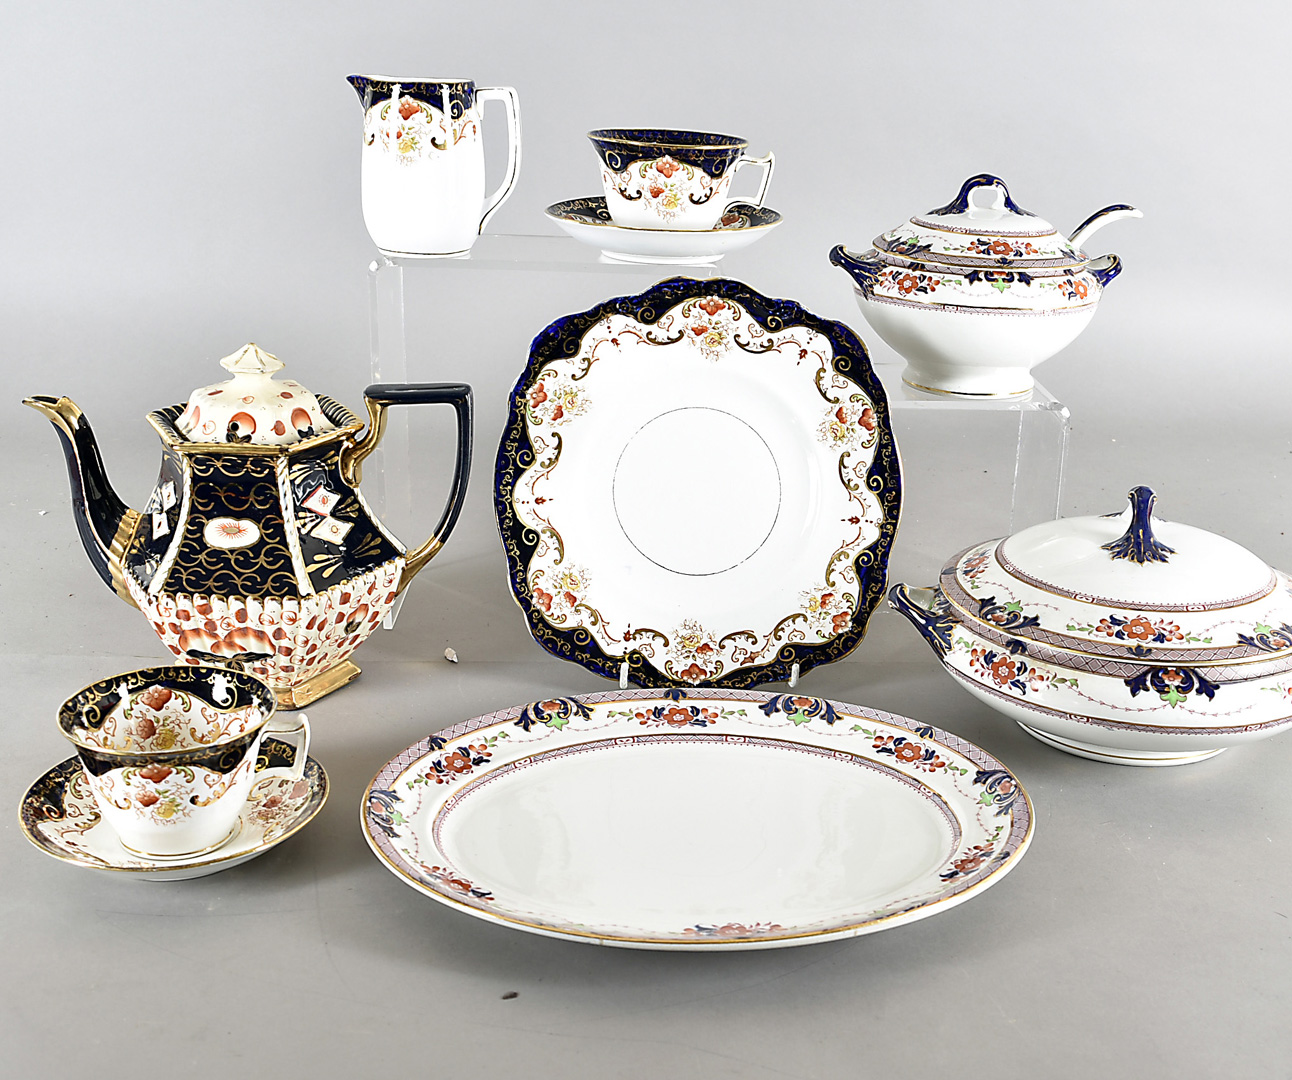 An Edwardian Whieldon Ware Norwood pattern part dinner service, comprising dinner plates, lunch